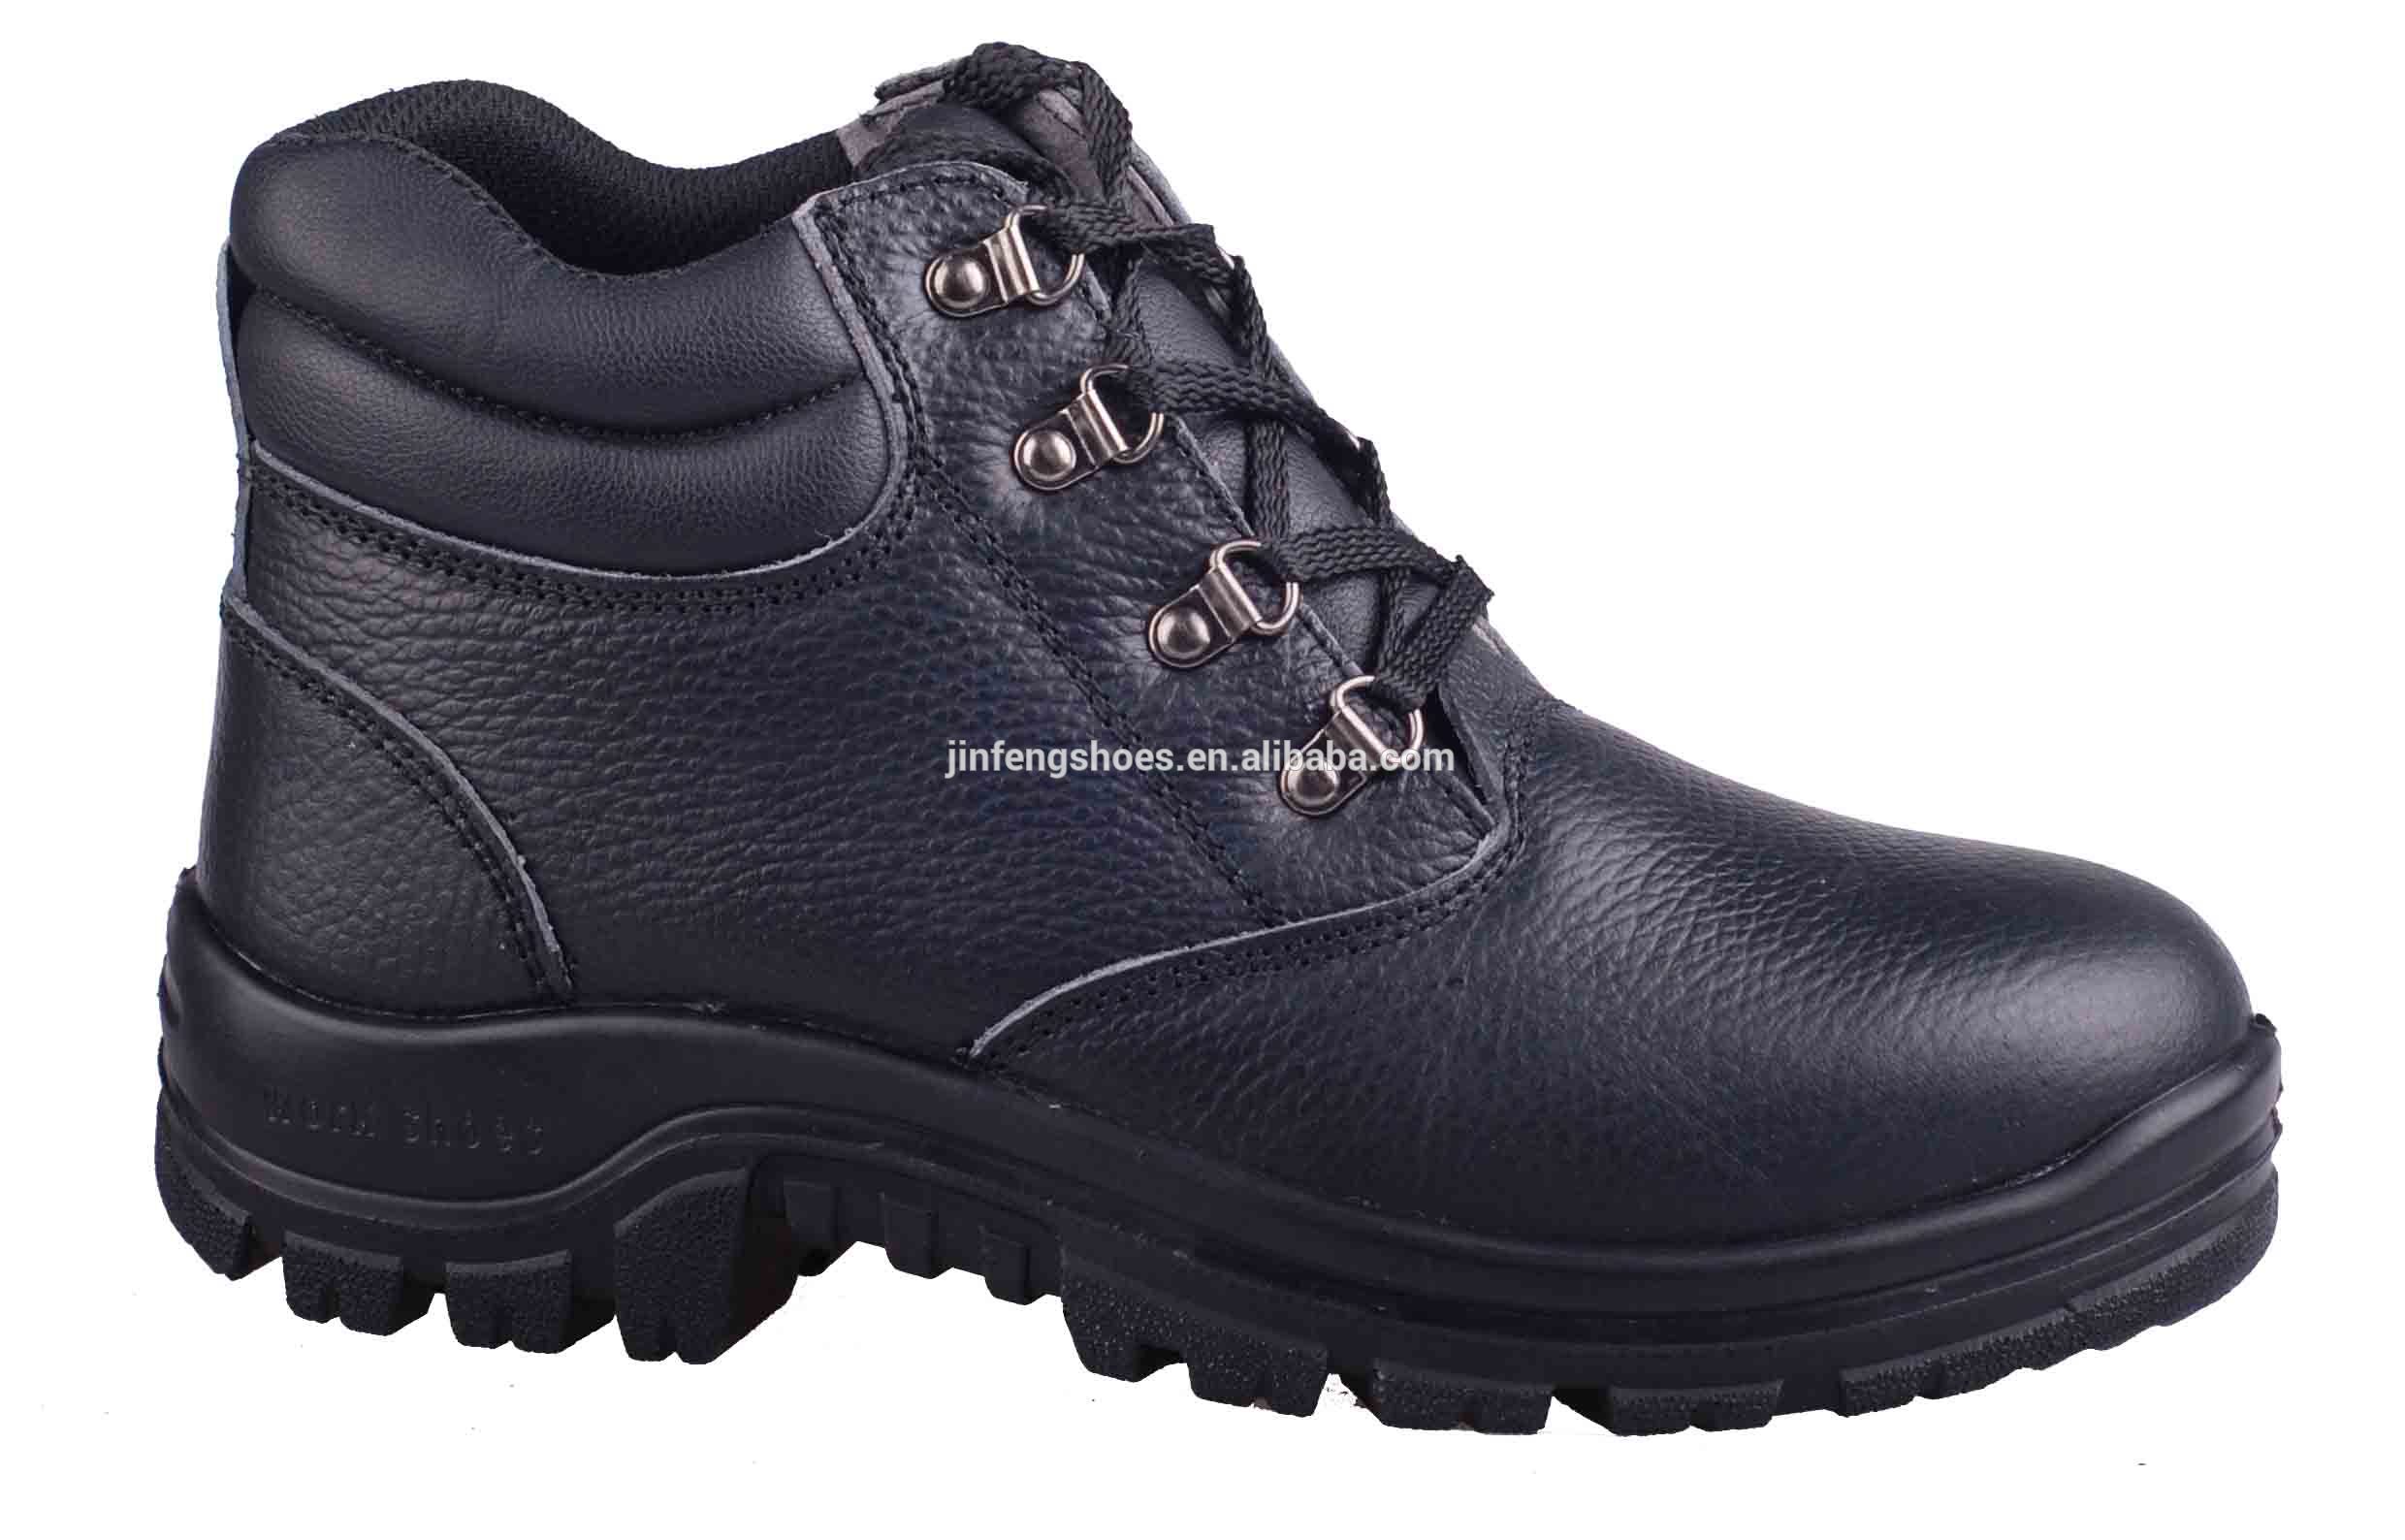 industrial safety shoes price